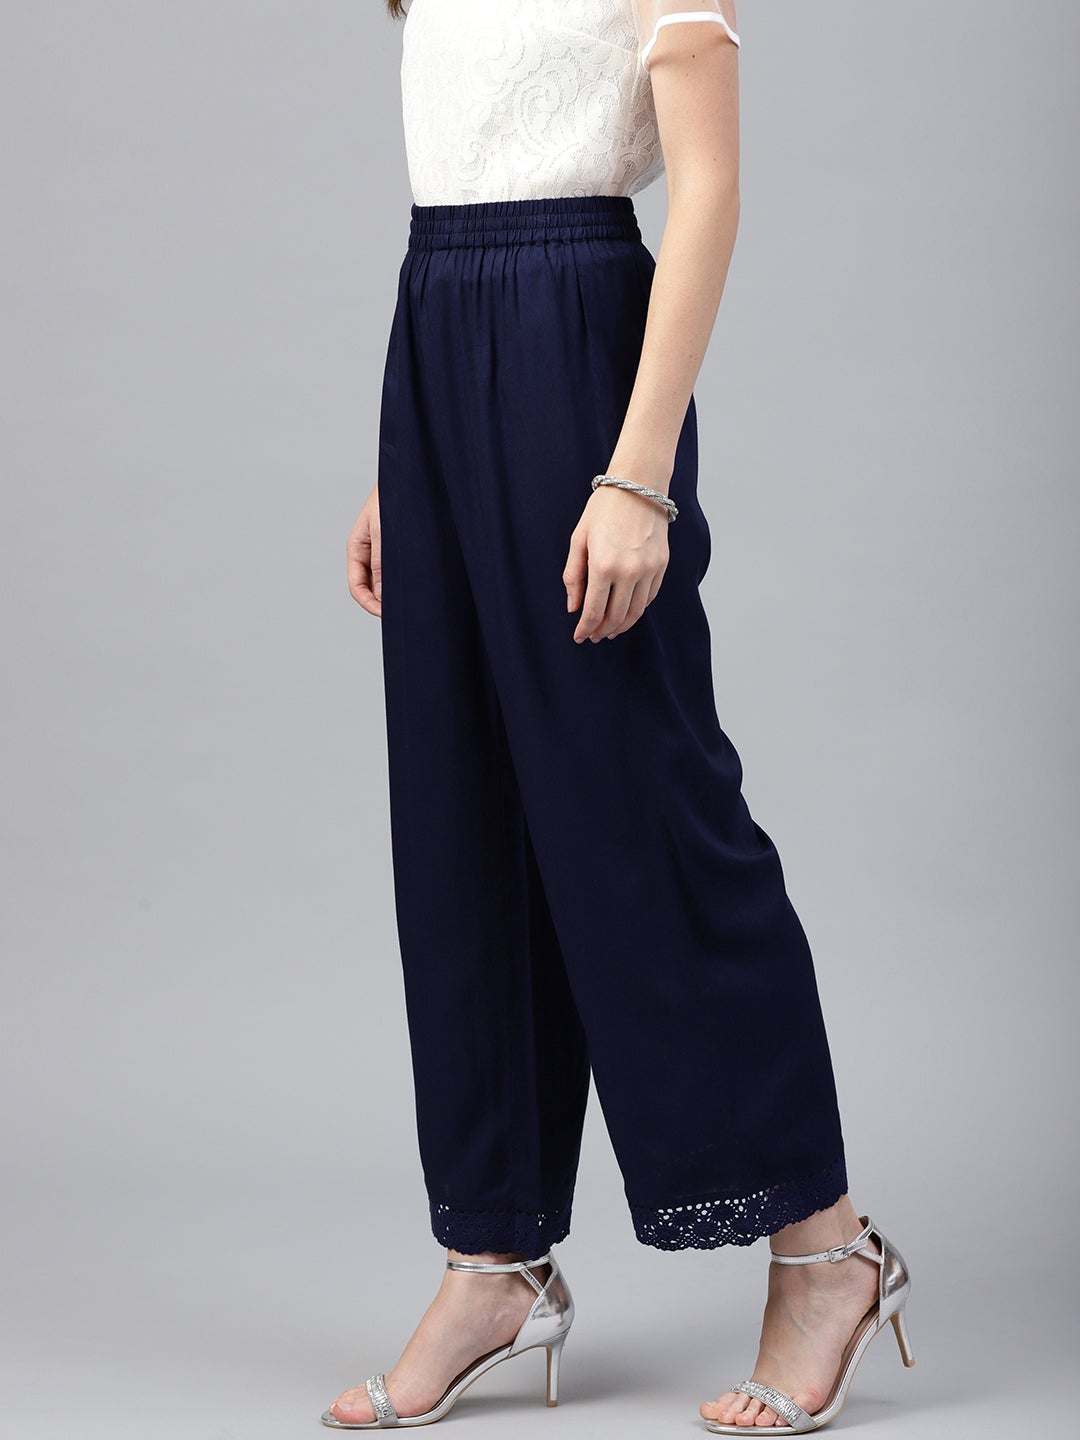 Juniper Navy Blue Solid Rayon Wide Leg Women Palazzo With One Pocket